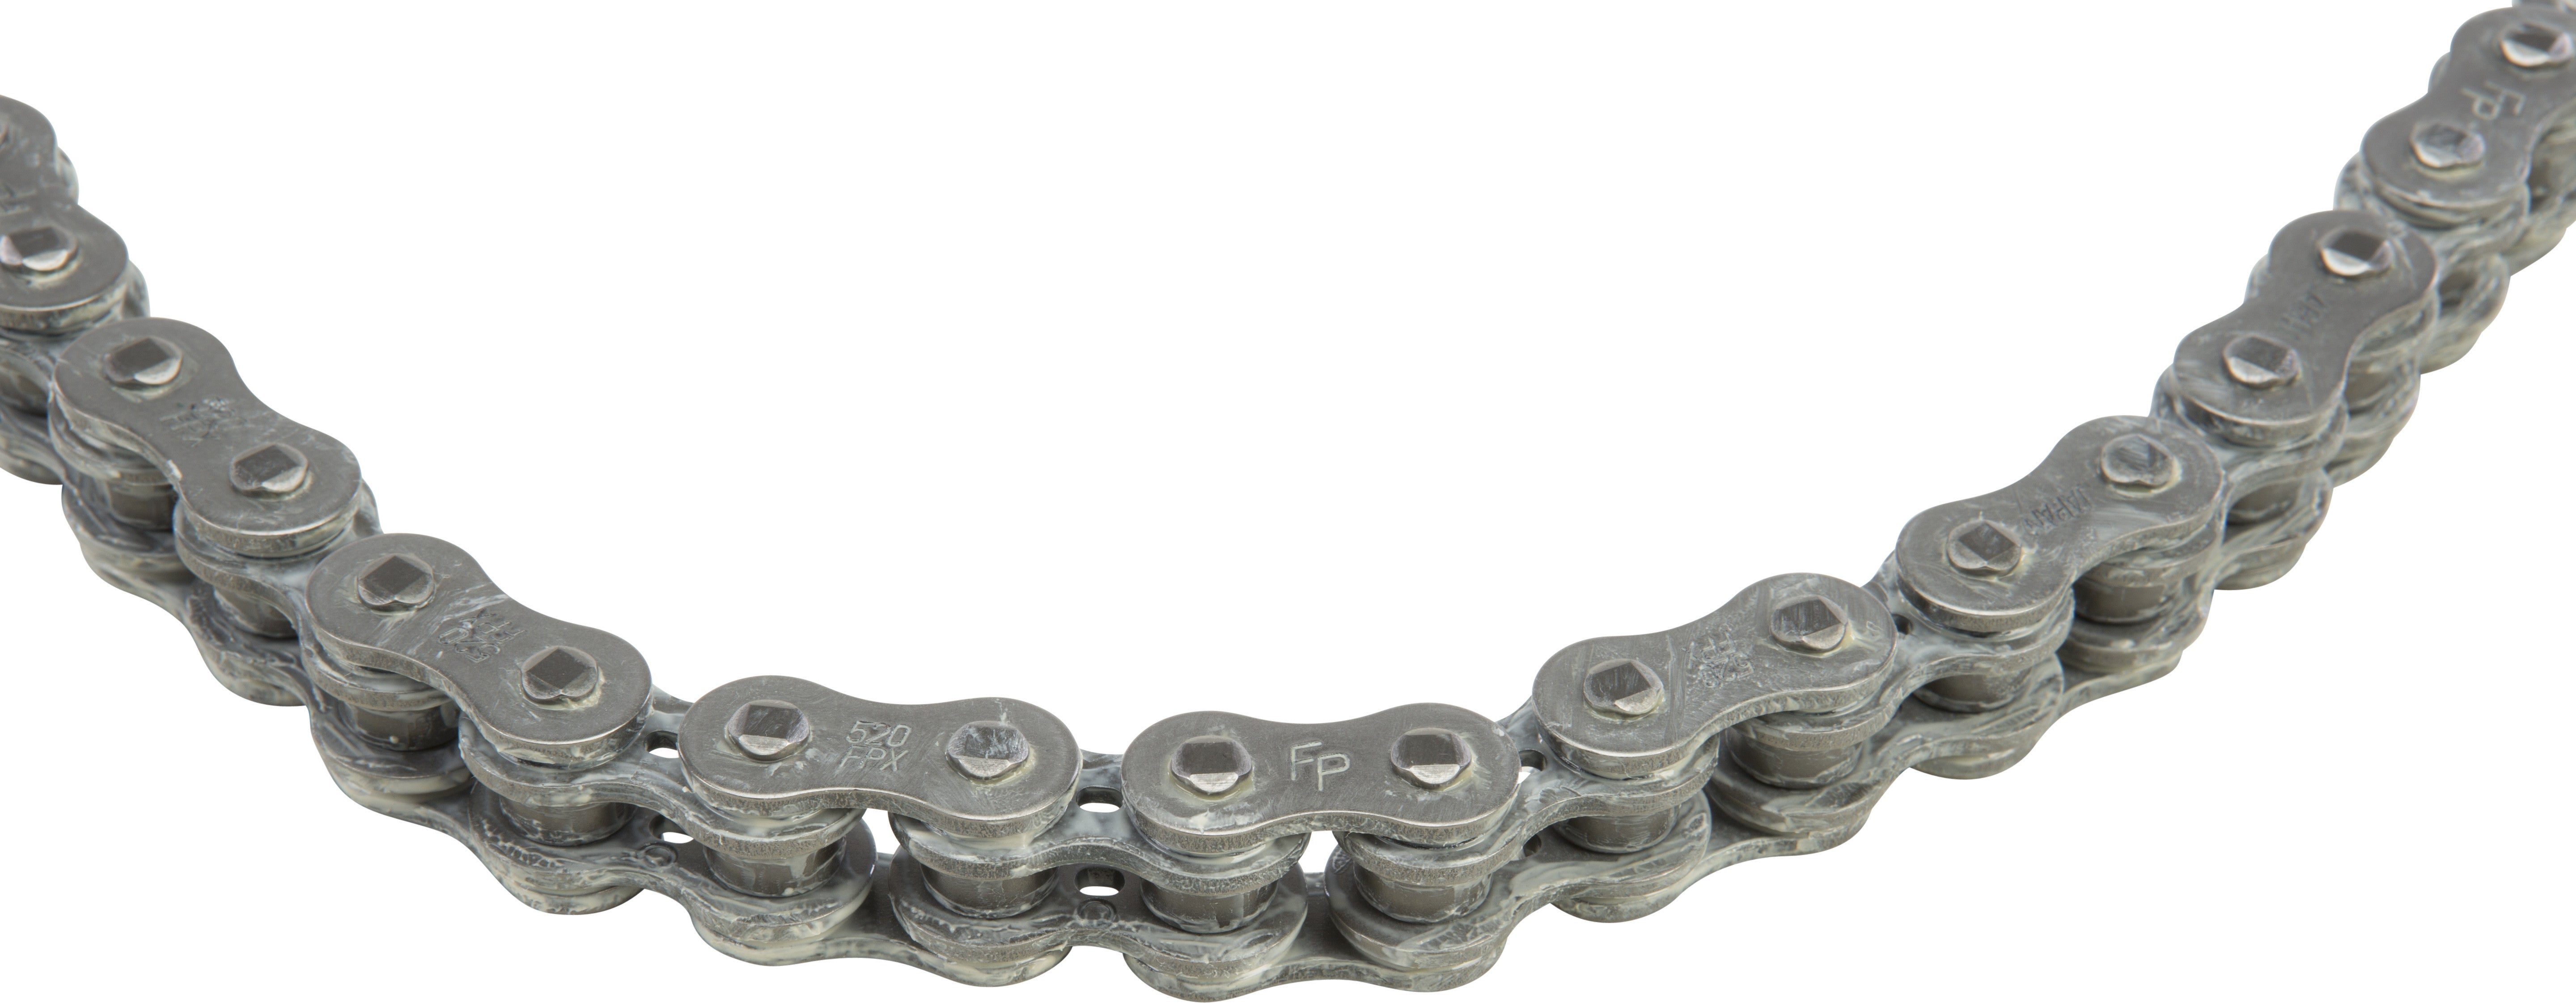 FIRE POWER, FIRE POWER X-RING CHAIN 25' ROLL 520FPX-25FT